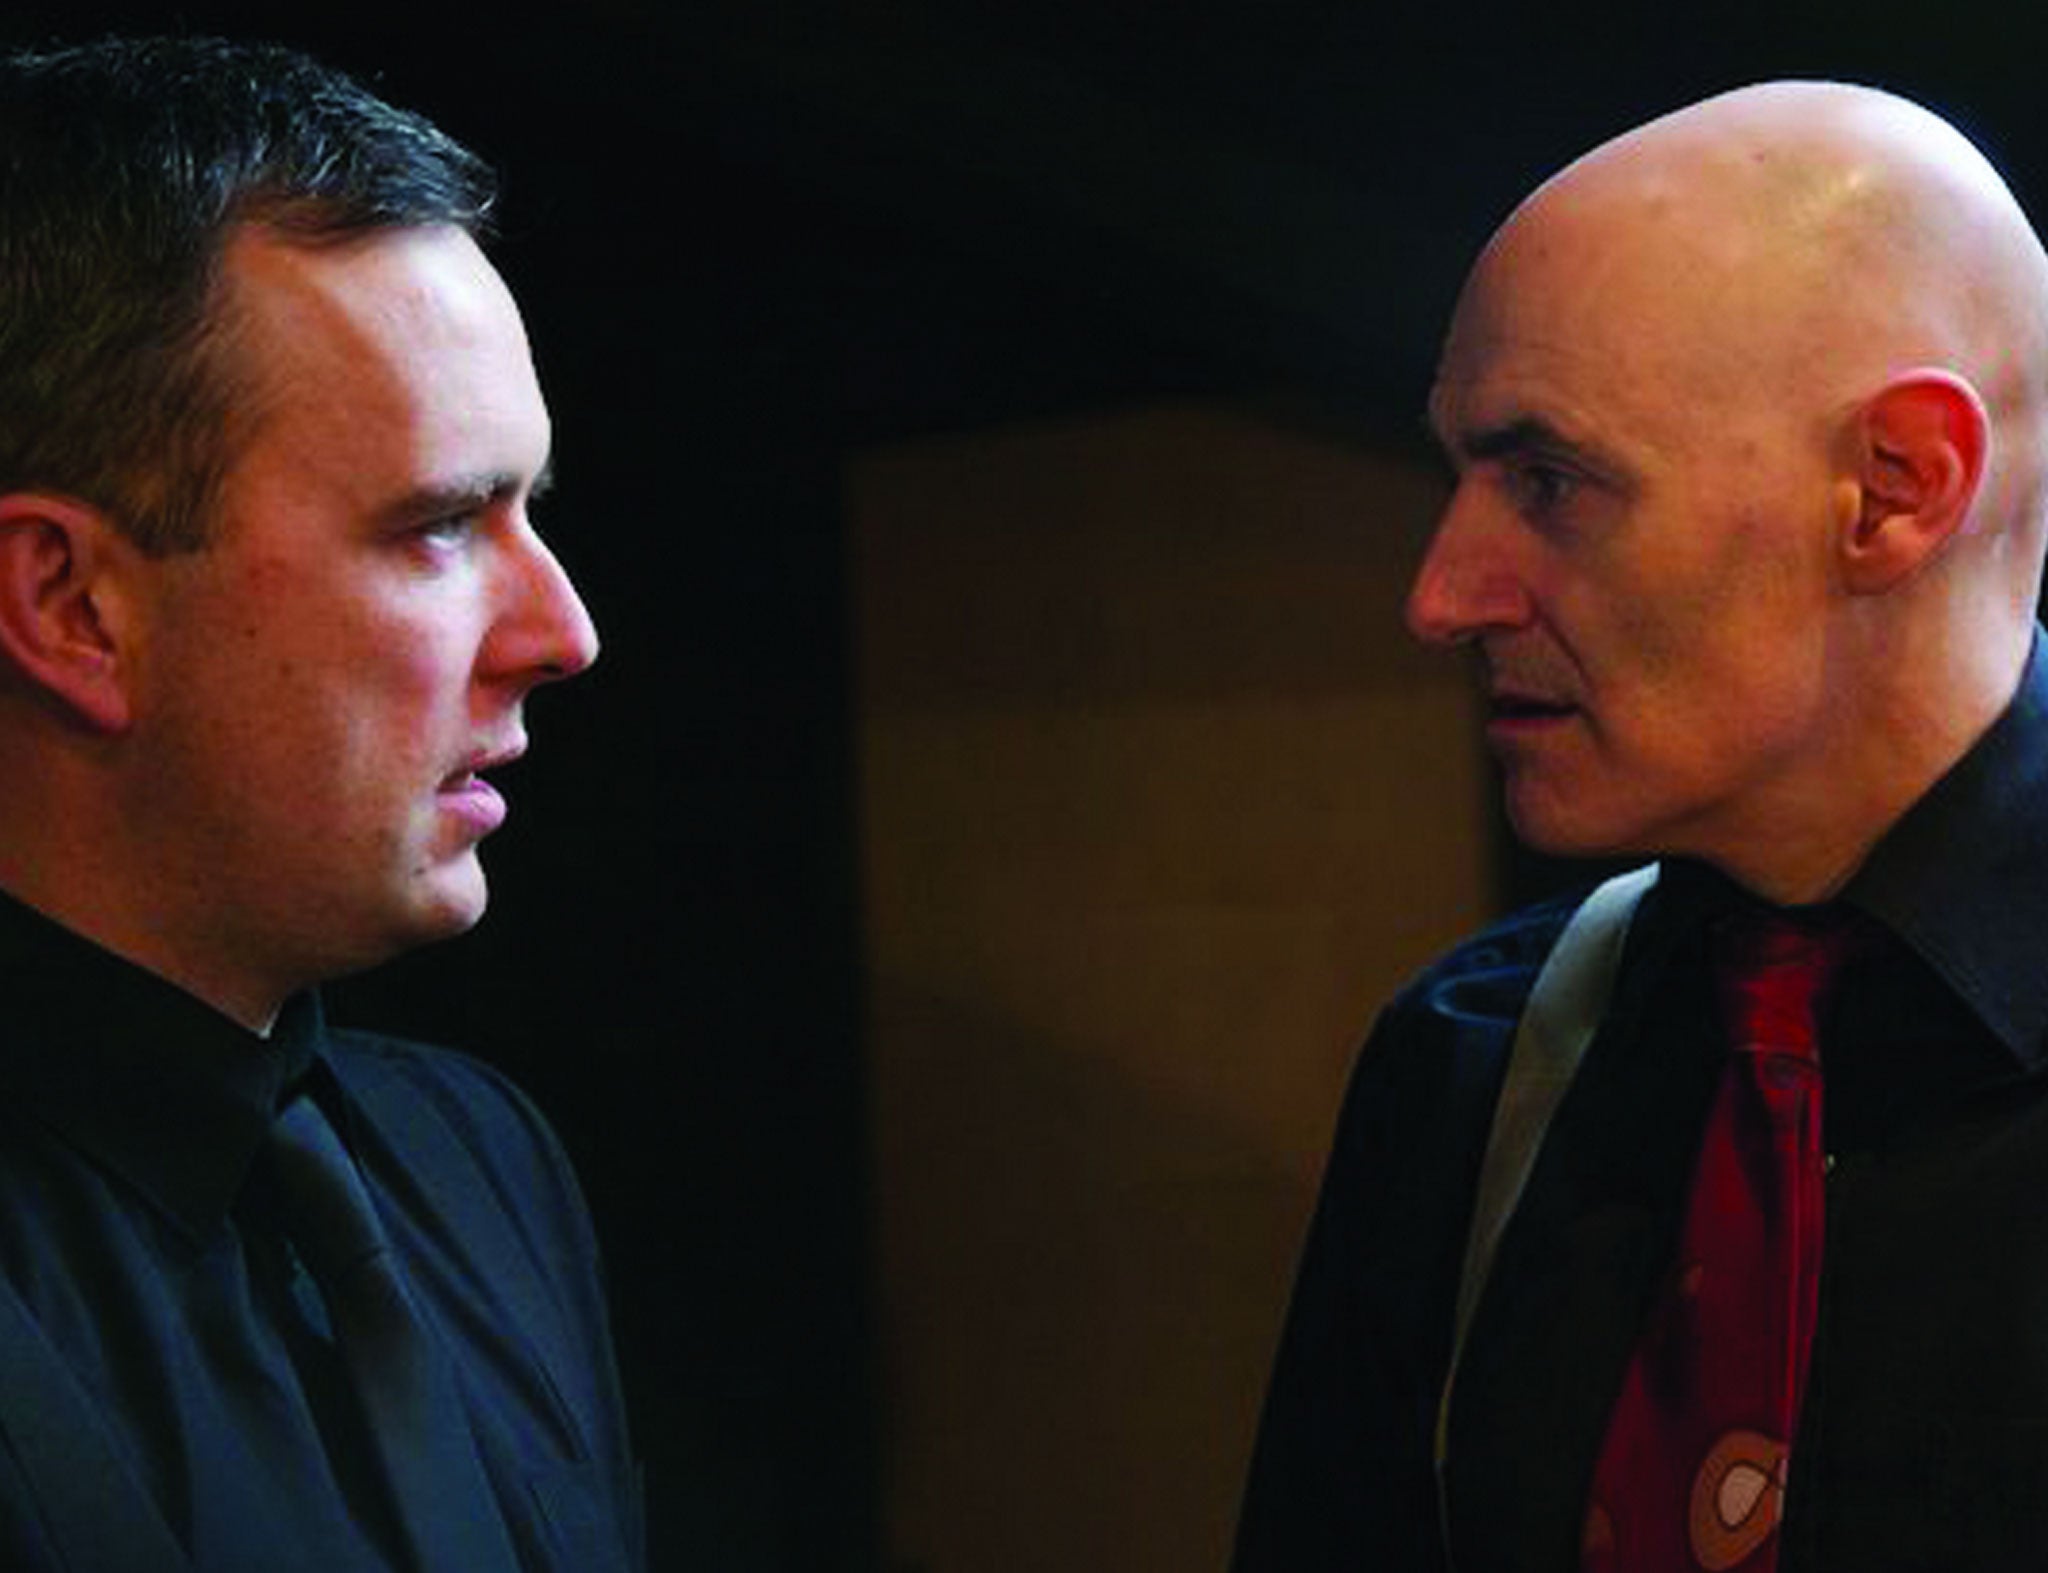 Harold Pinter's The Dumb Waiter at the New Town Theatre